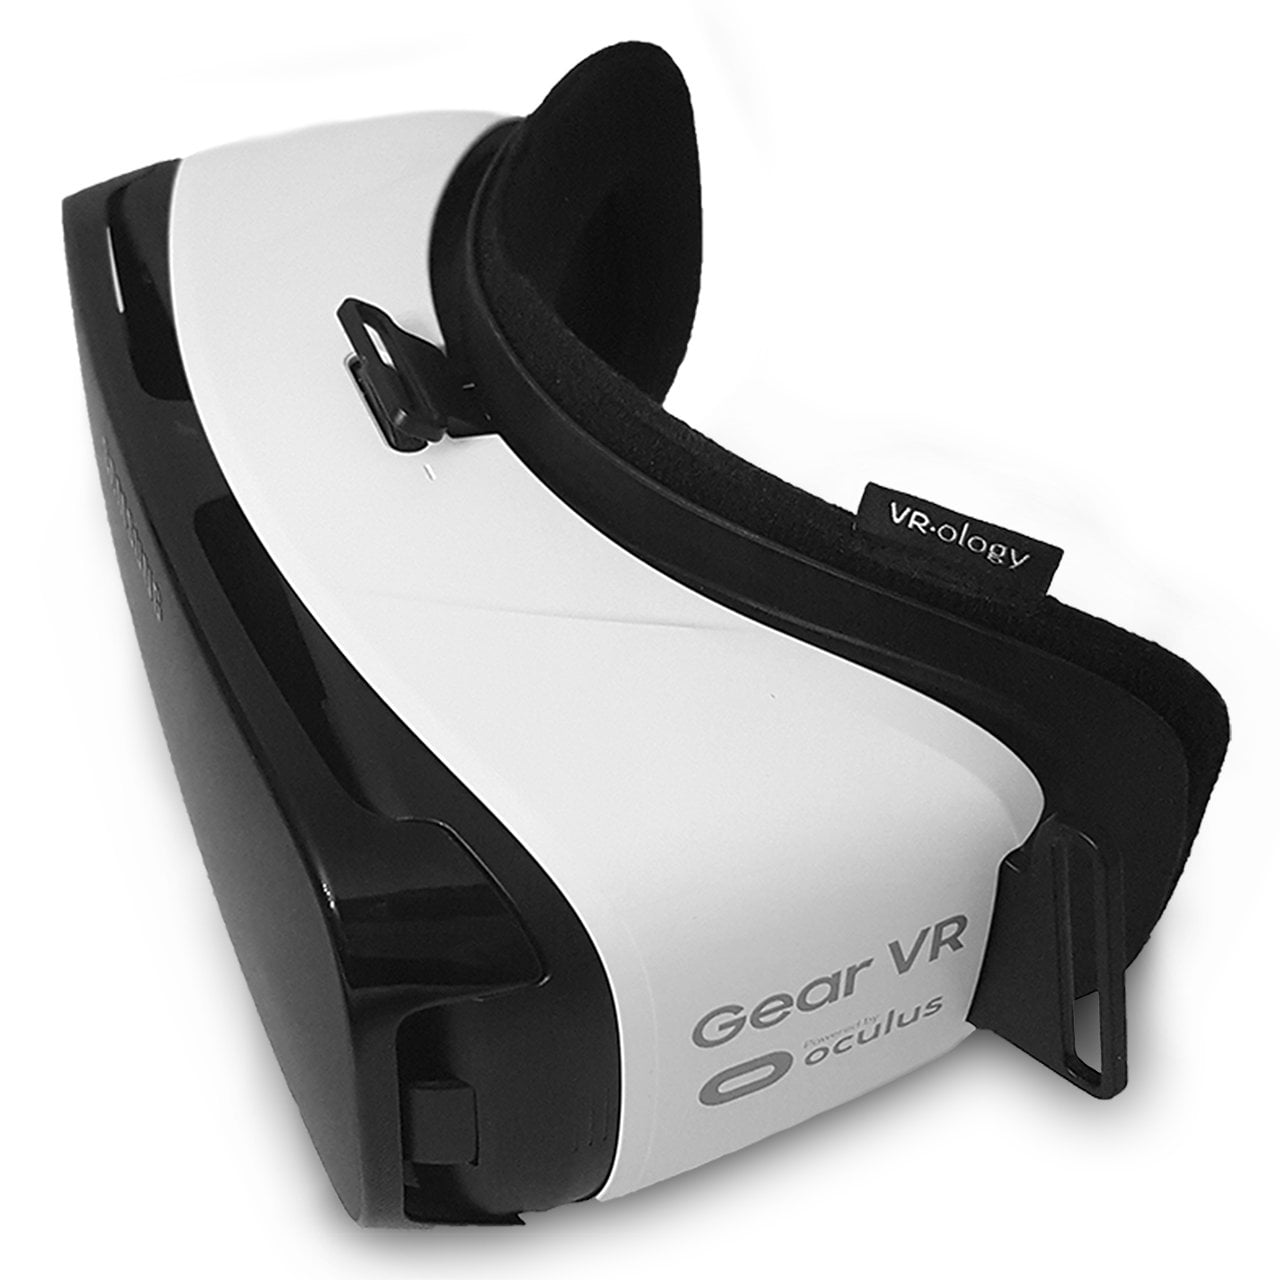 Best of Vr porn gear vr